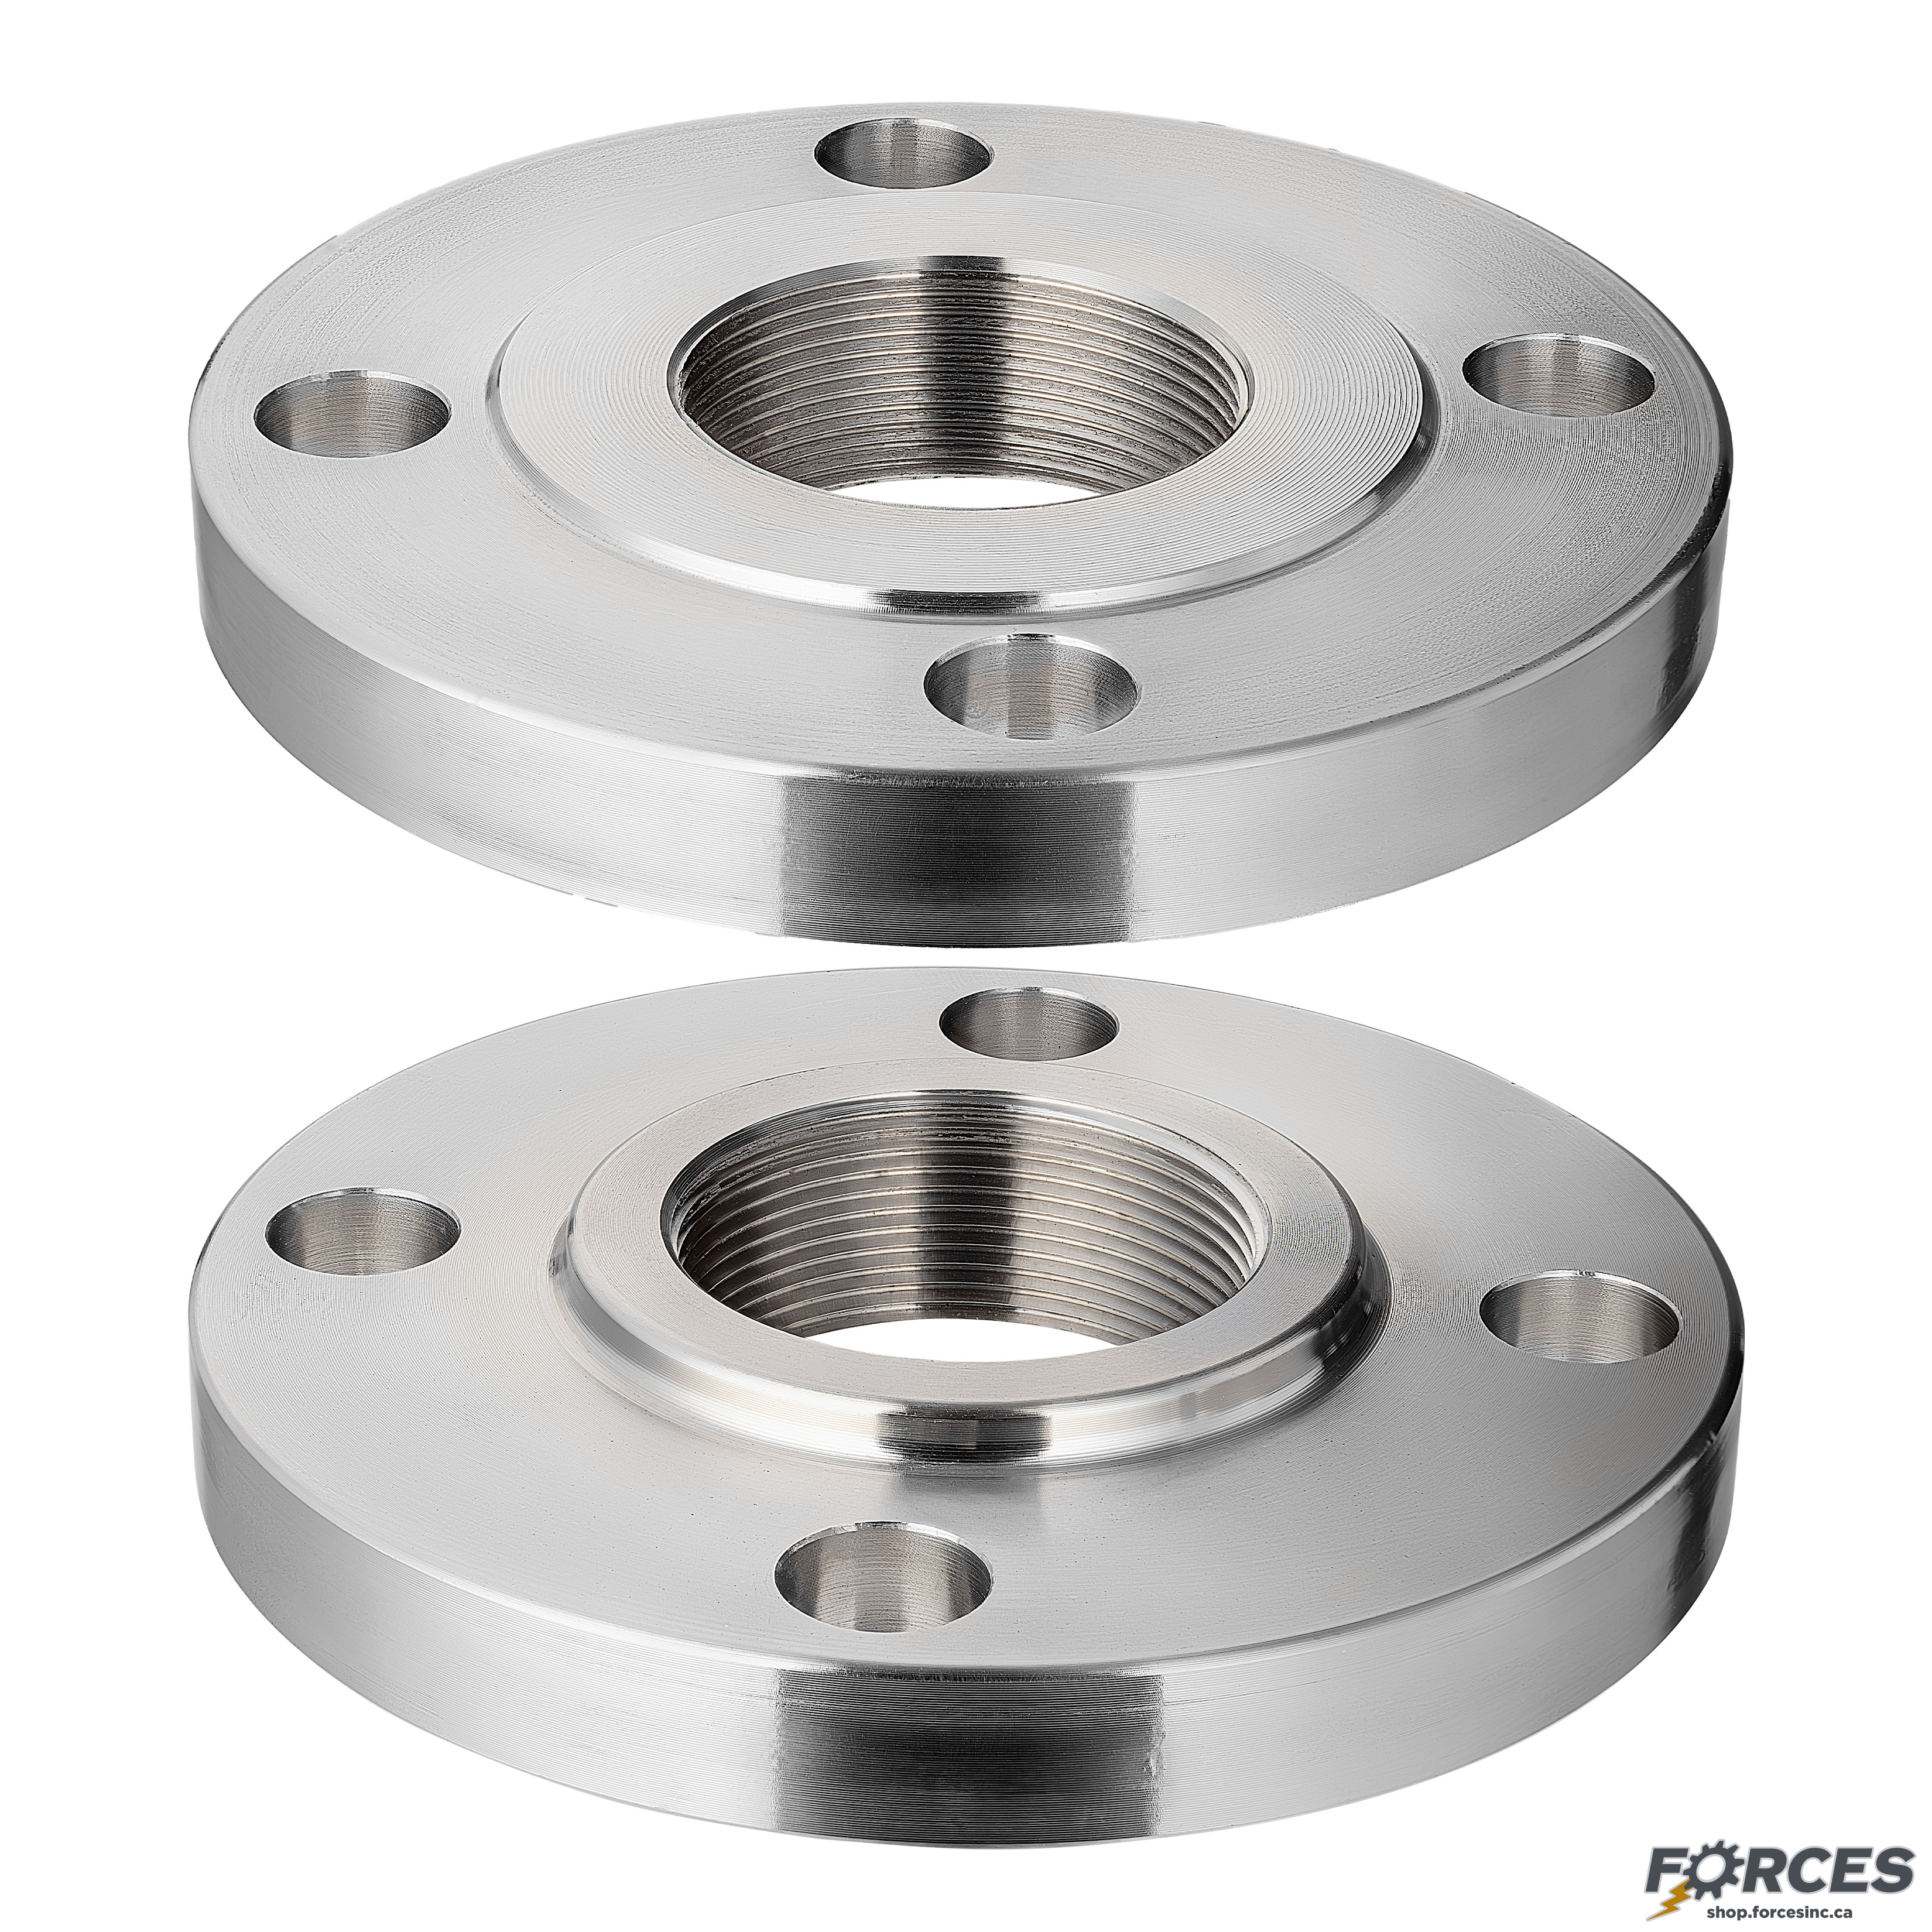 1" Threaded Flange NPT Class #150 - Stainless Steel 316 - Forces Inc